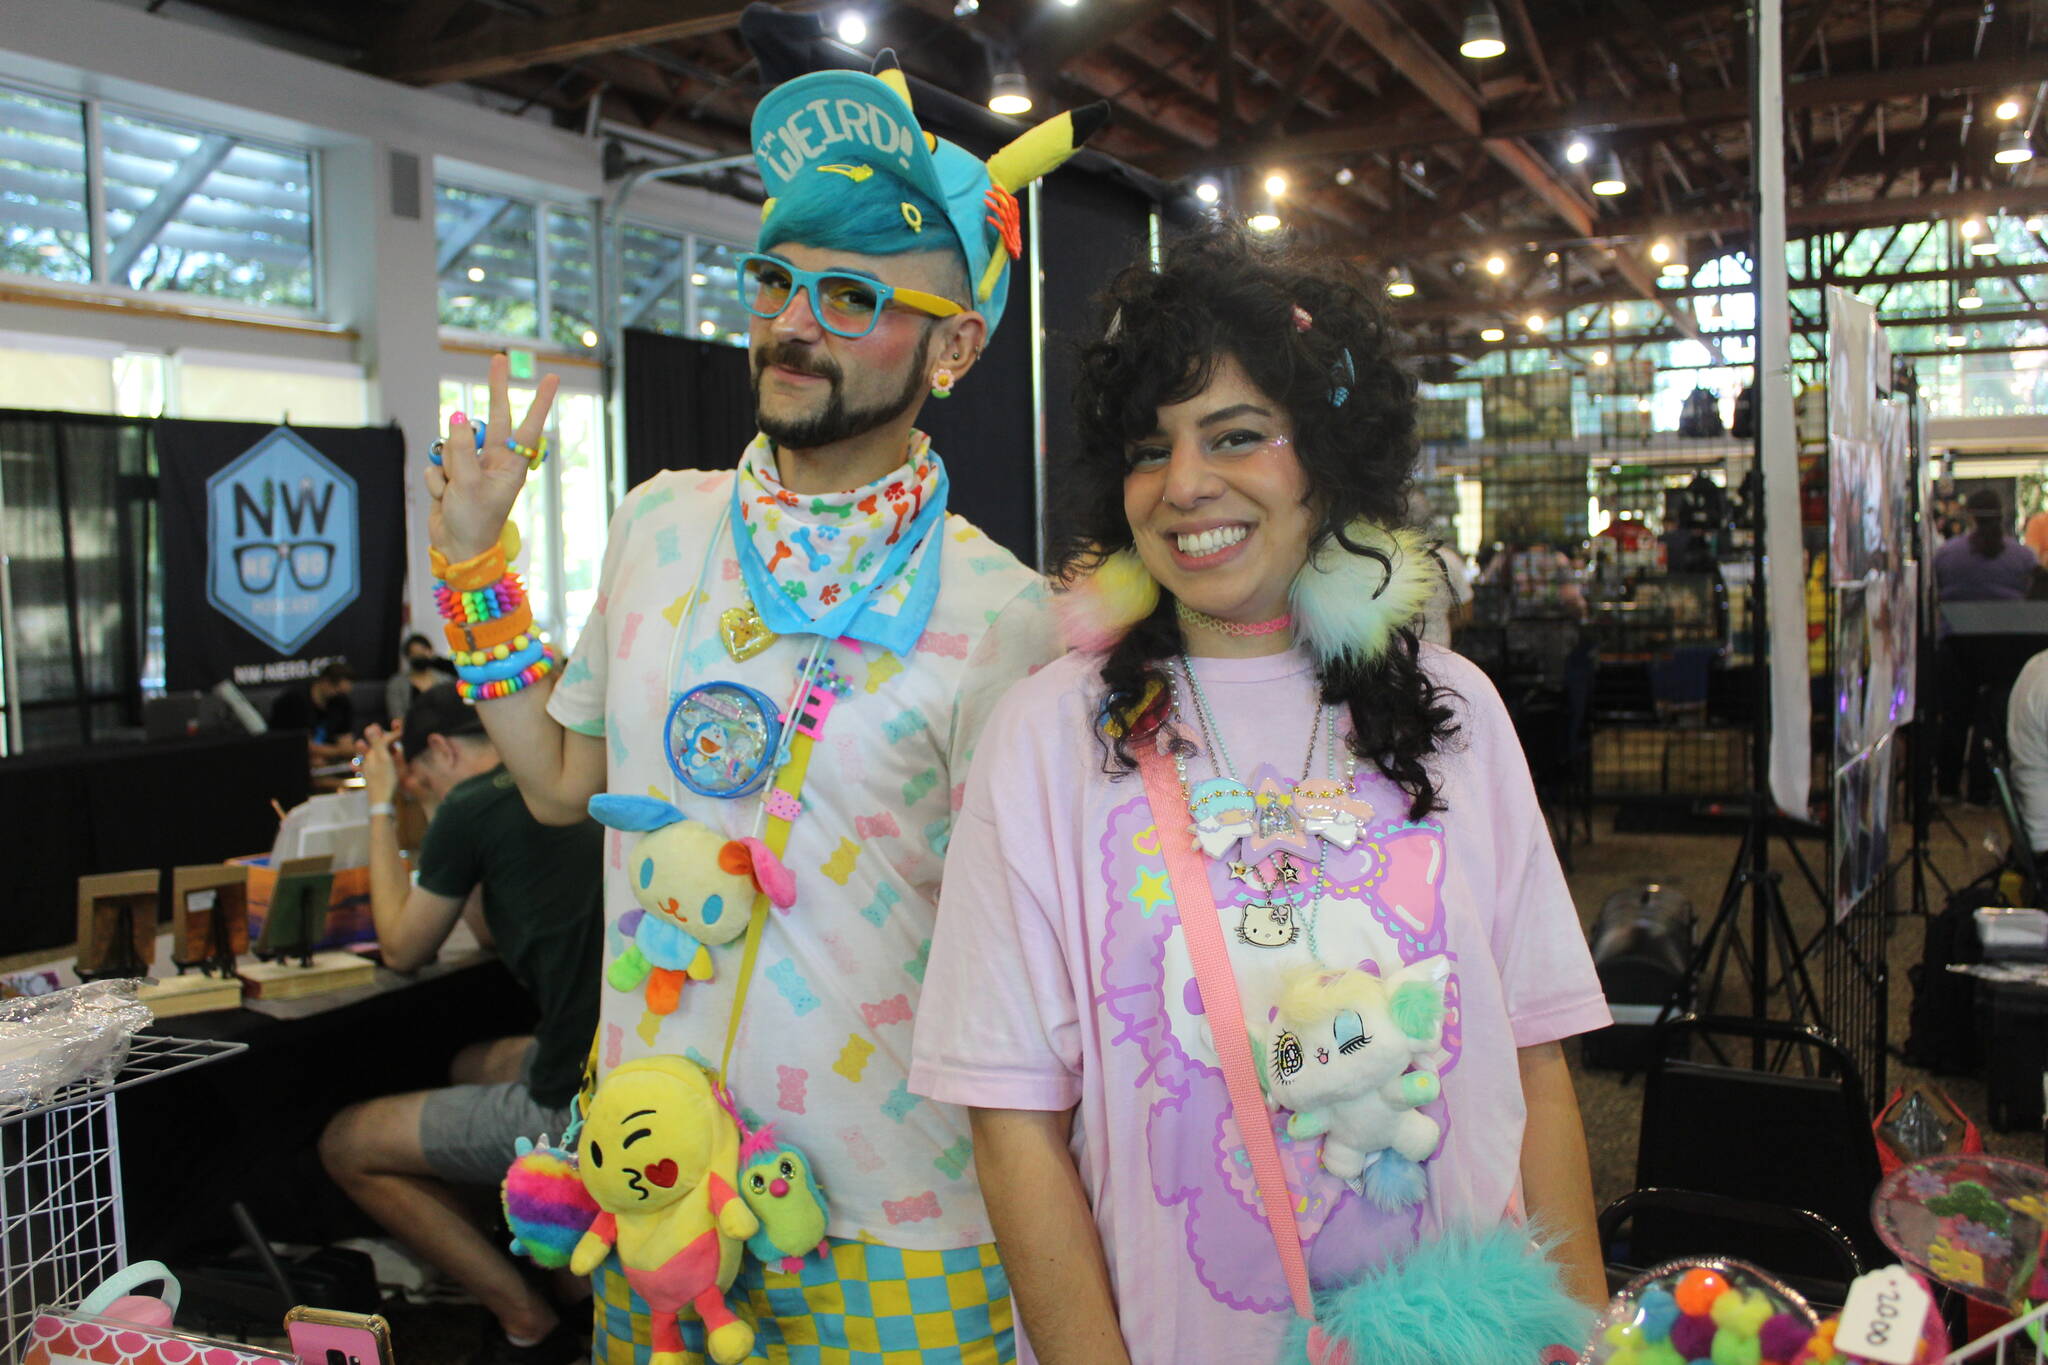 Colin Aceves, a special guest at Renton City Retro, and Lena Osuna pose at their kawaii and anime-inspired booth. Photo by Bailey Jo Josie/Sound Publishing.